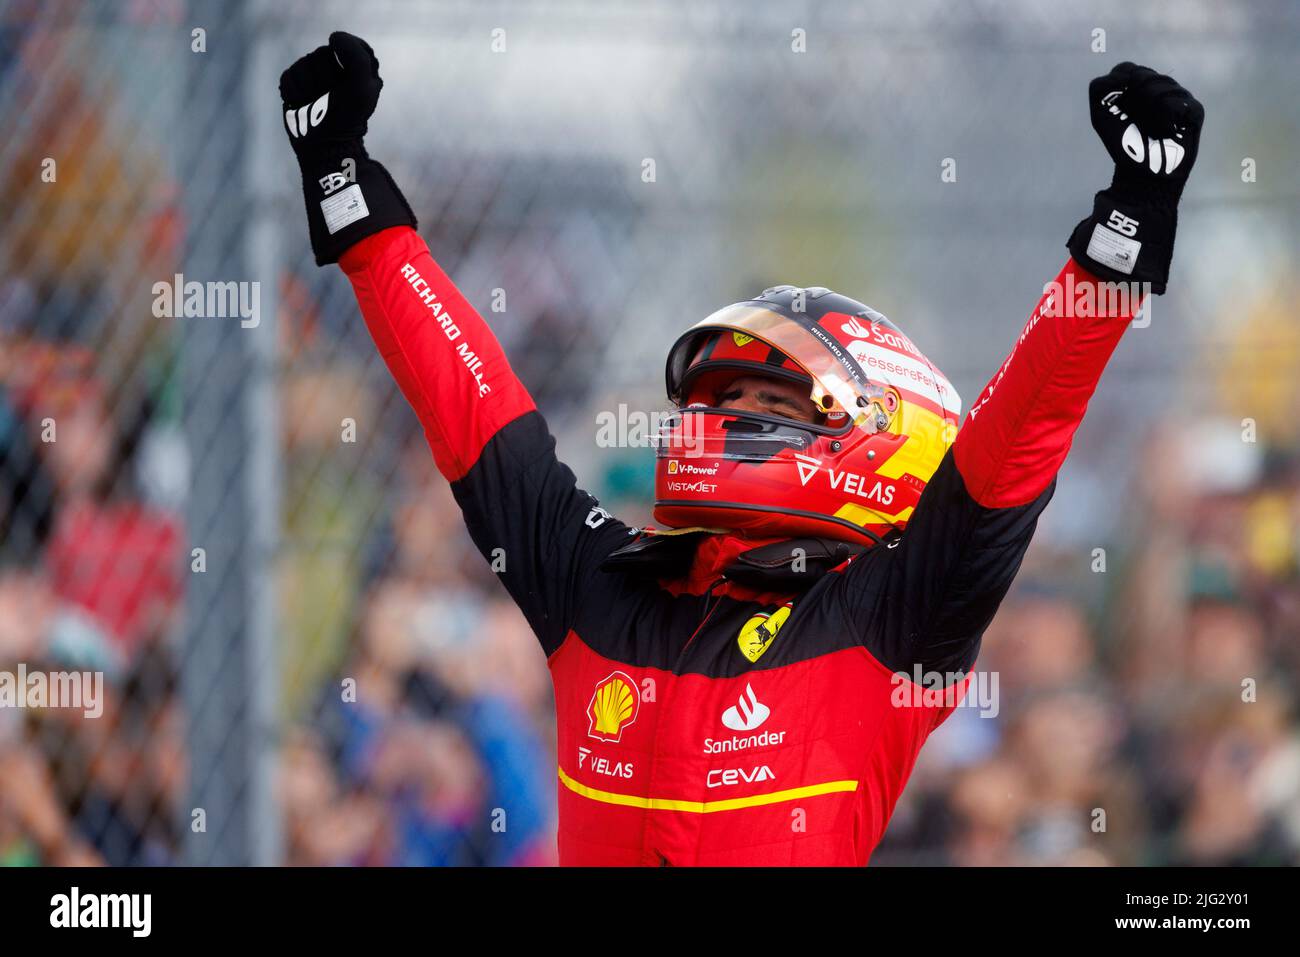 Carlos Sainz celebrates winning his first ever F1 Grand Prix standing on top of his car in Parc ferme at the F1 British Grand Prix. Carlos Sainz wins Stock Photo